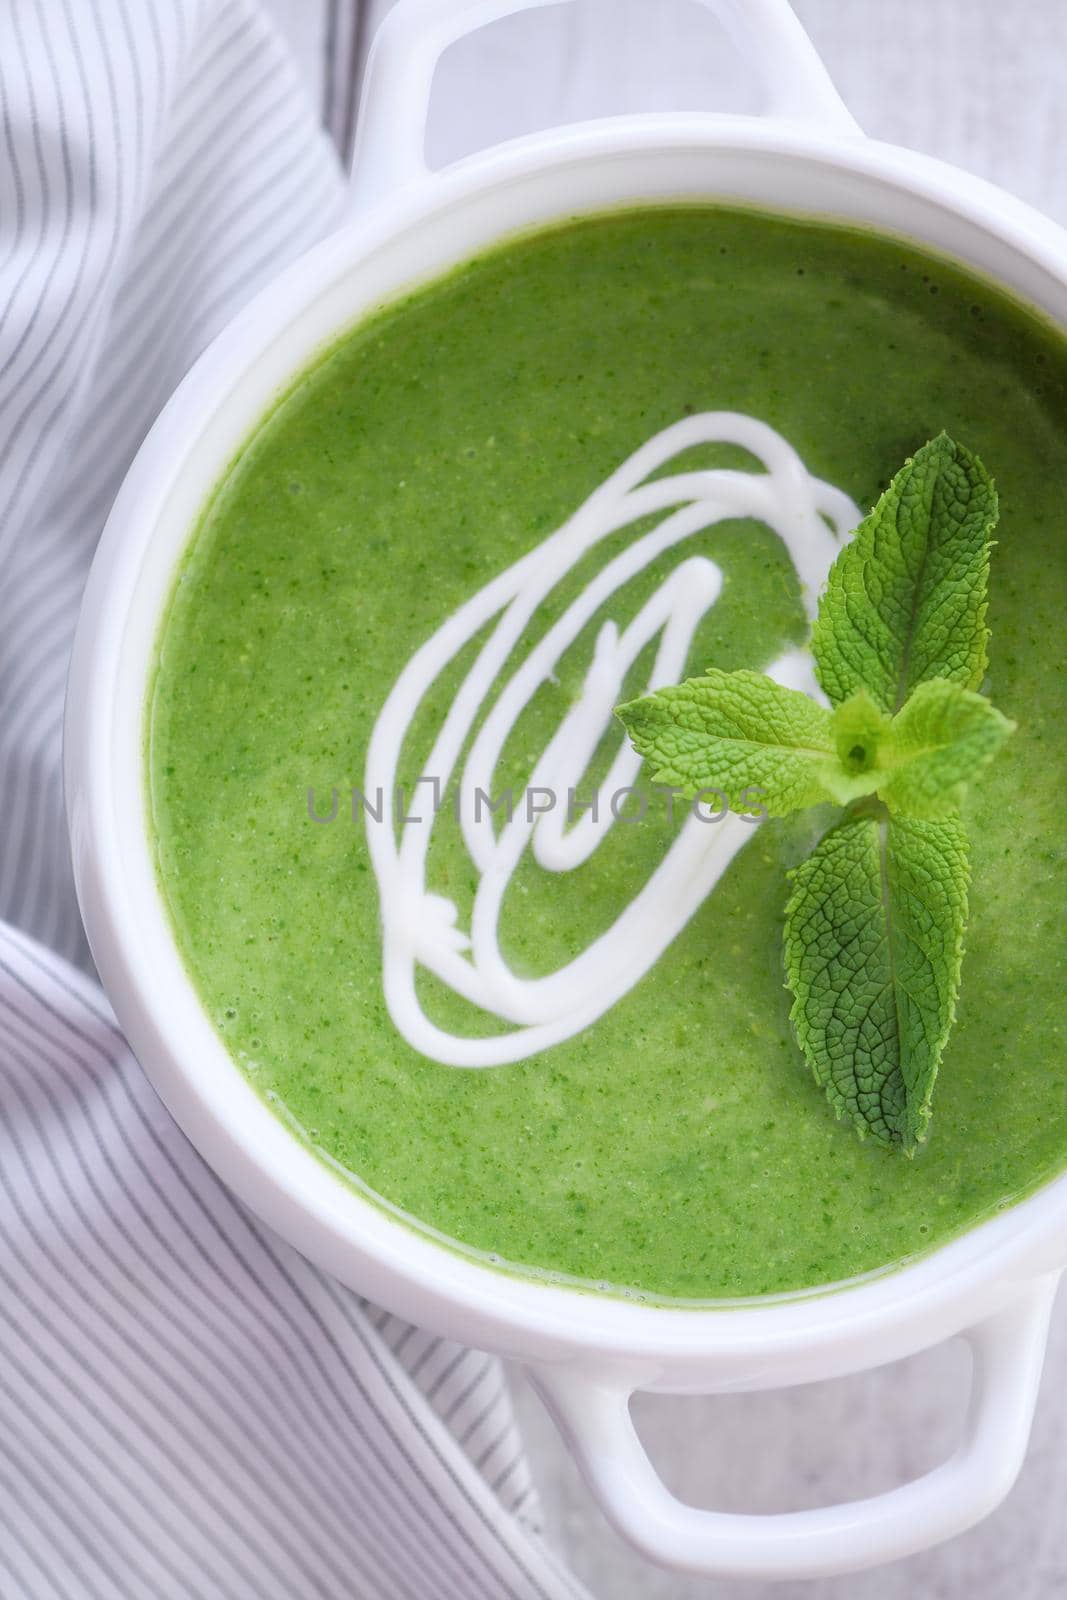 Spinach puree soup seasoned with cream and mint